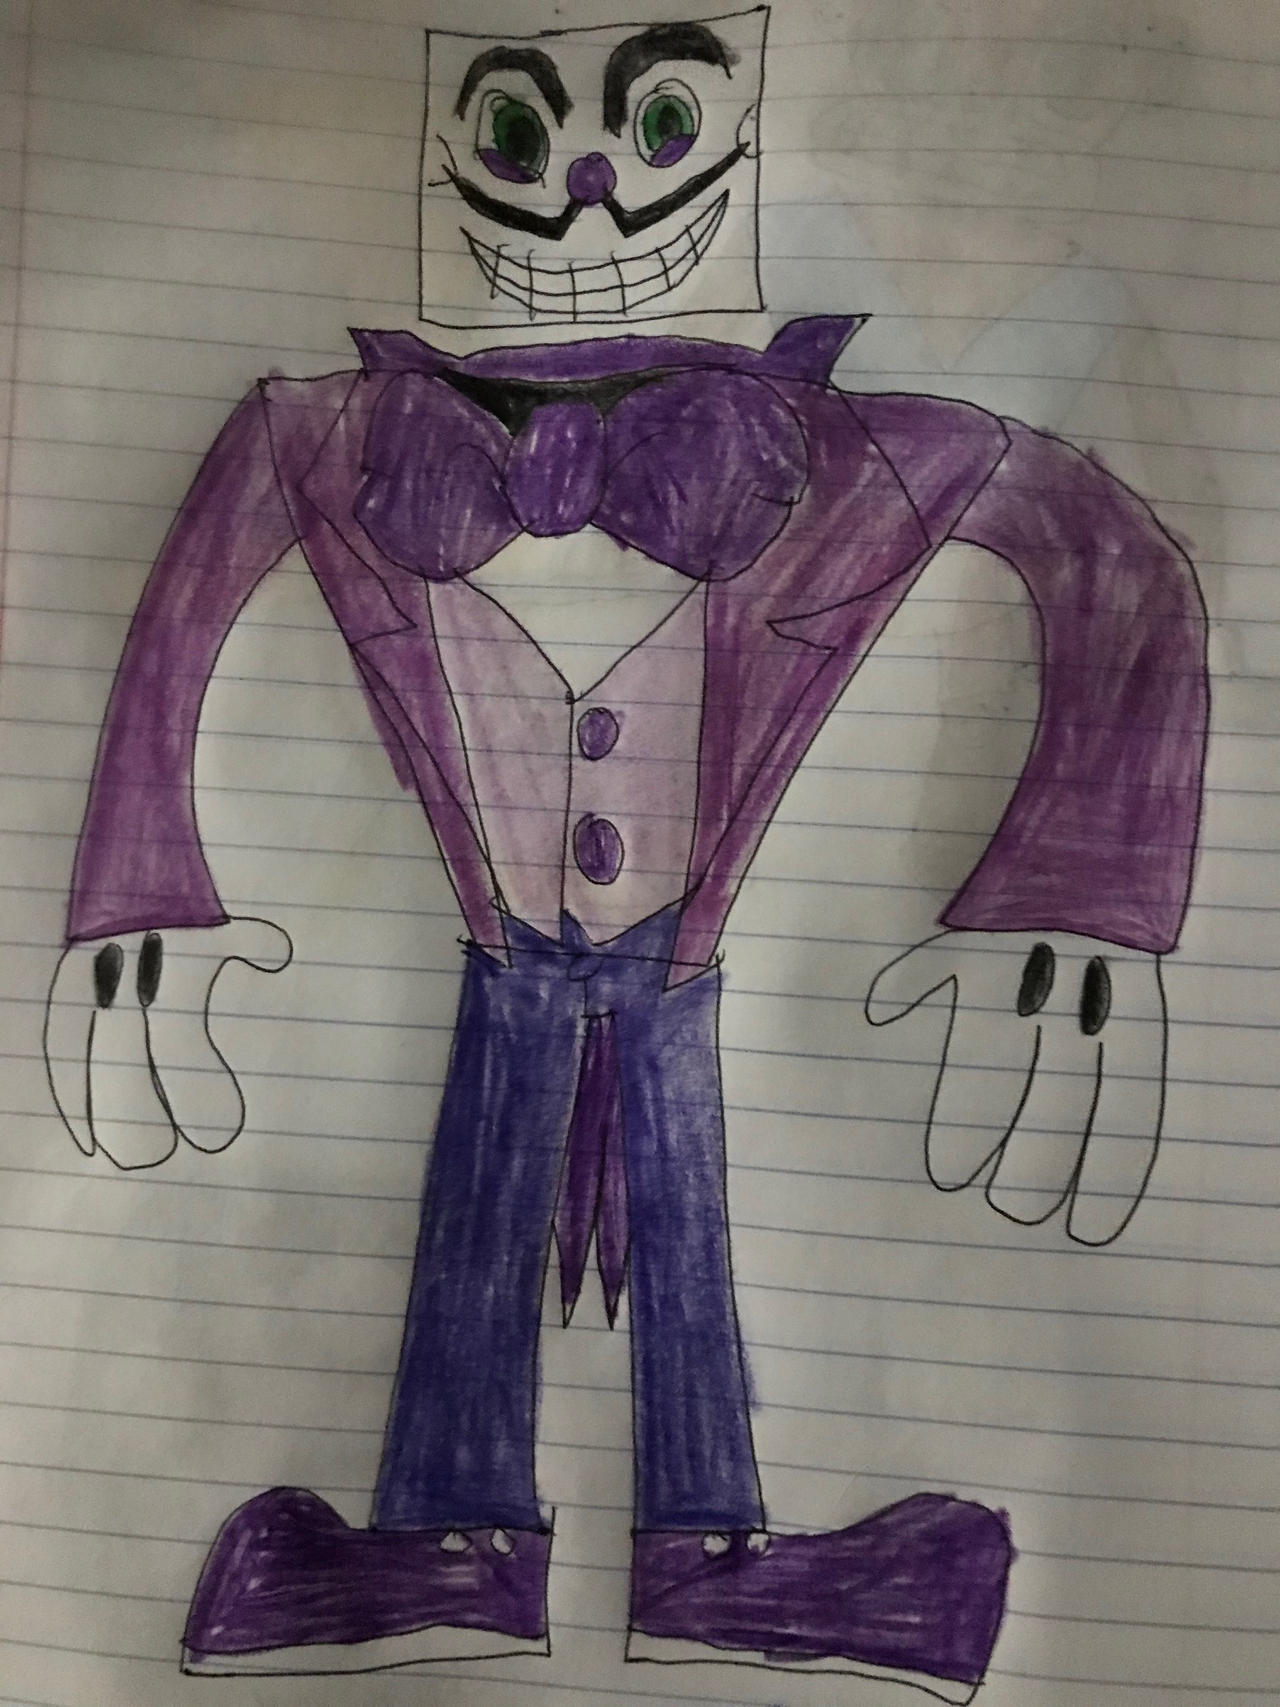 tjener overgive Cater Cuphead Bosses: King Dice by dylanphammack on DeviantArt